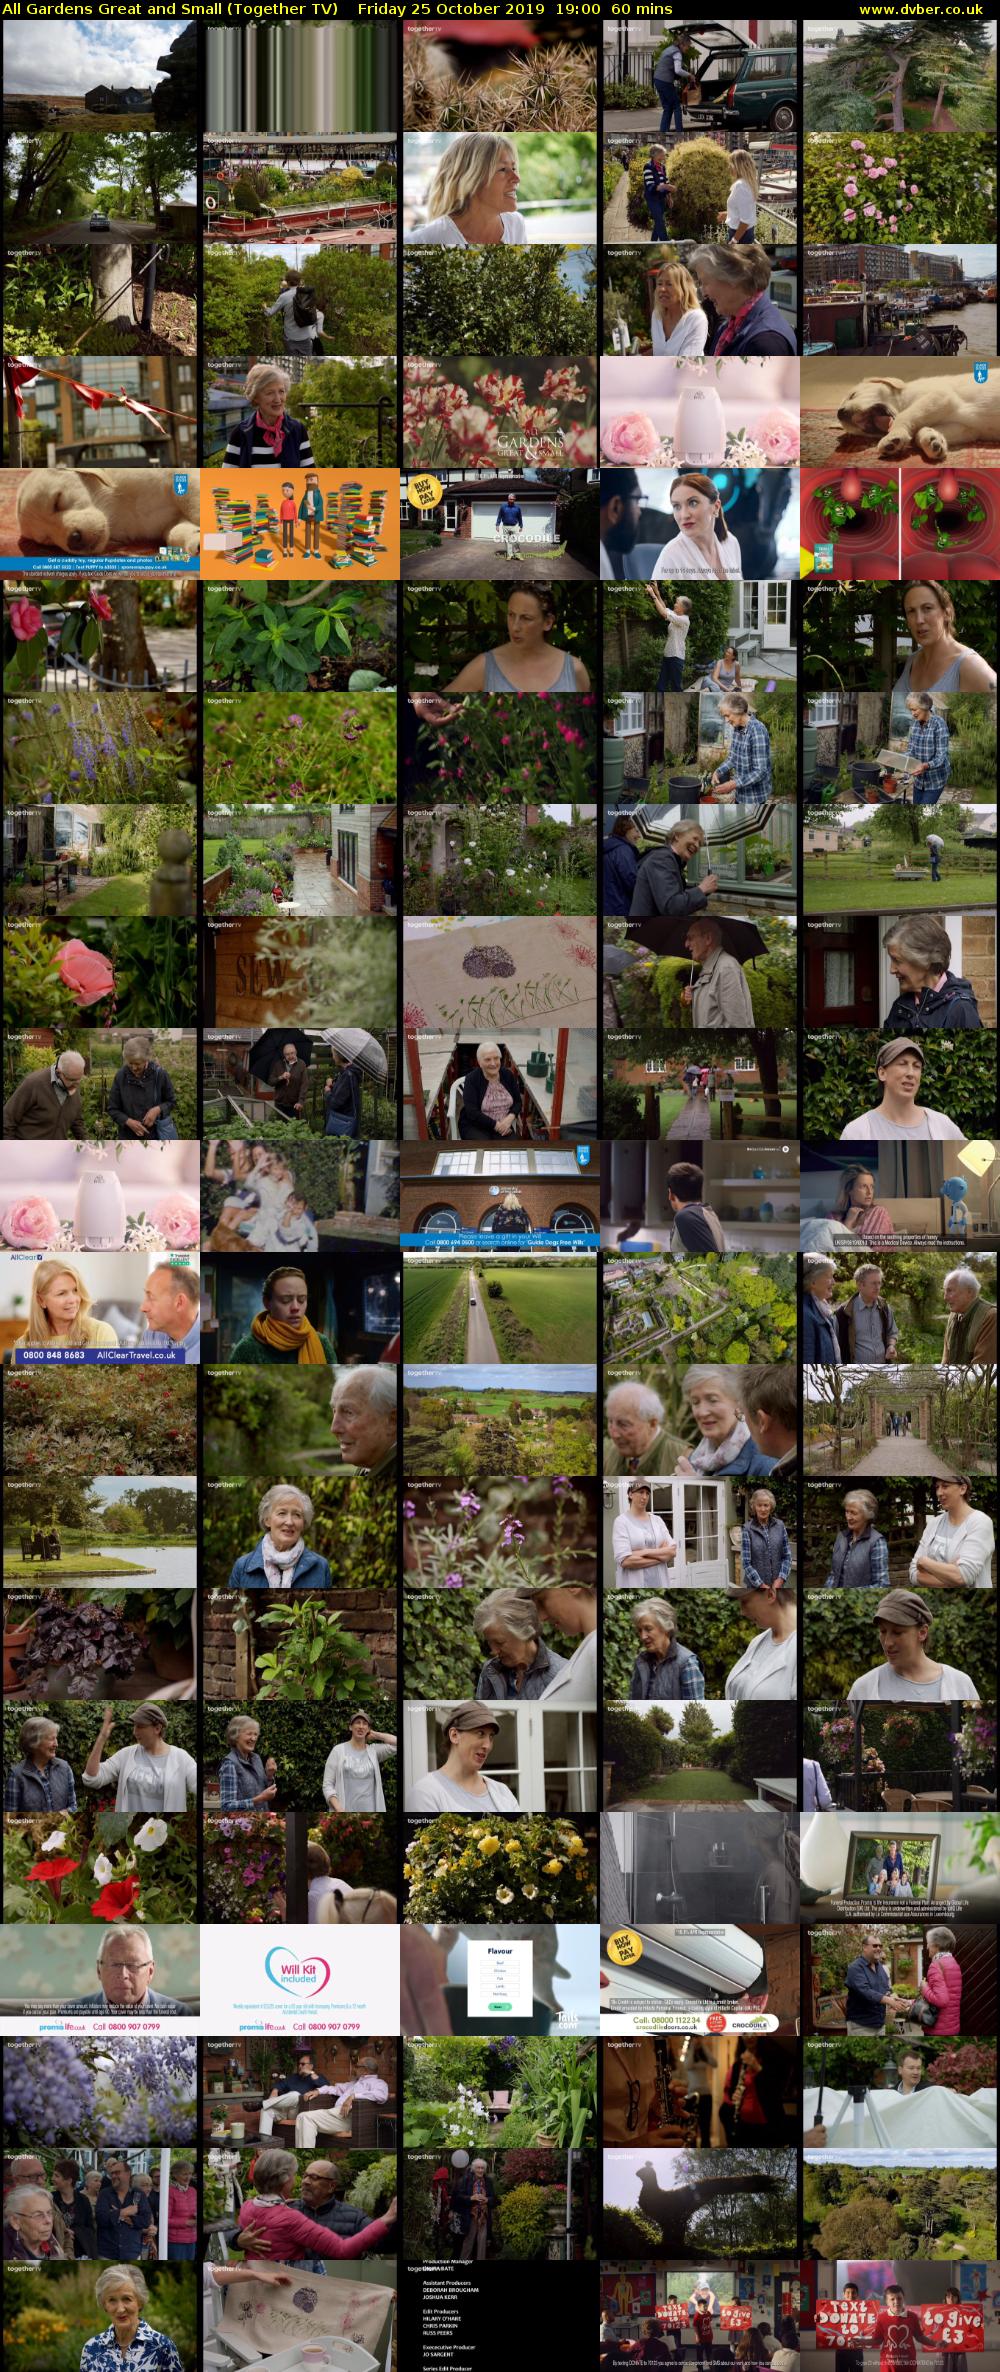 All Gardens Great and Small (Together TV) Friday 25 October 2019 19:00 - 20:00